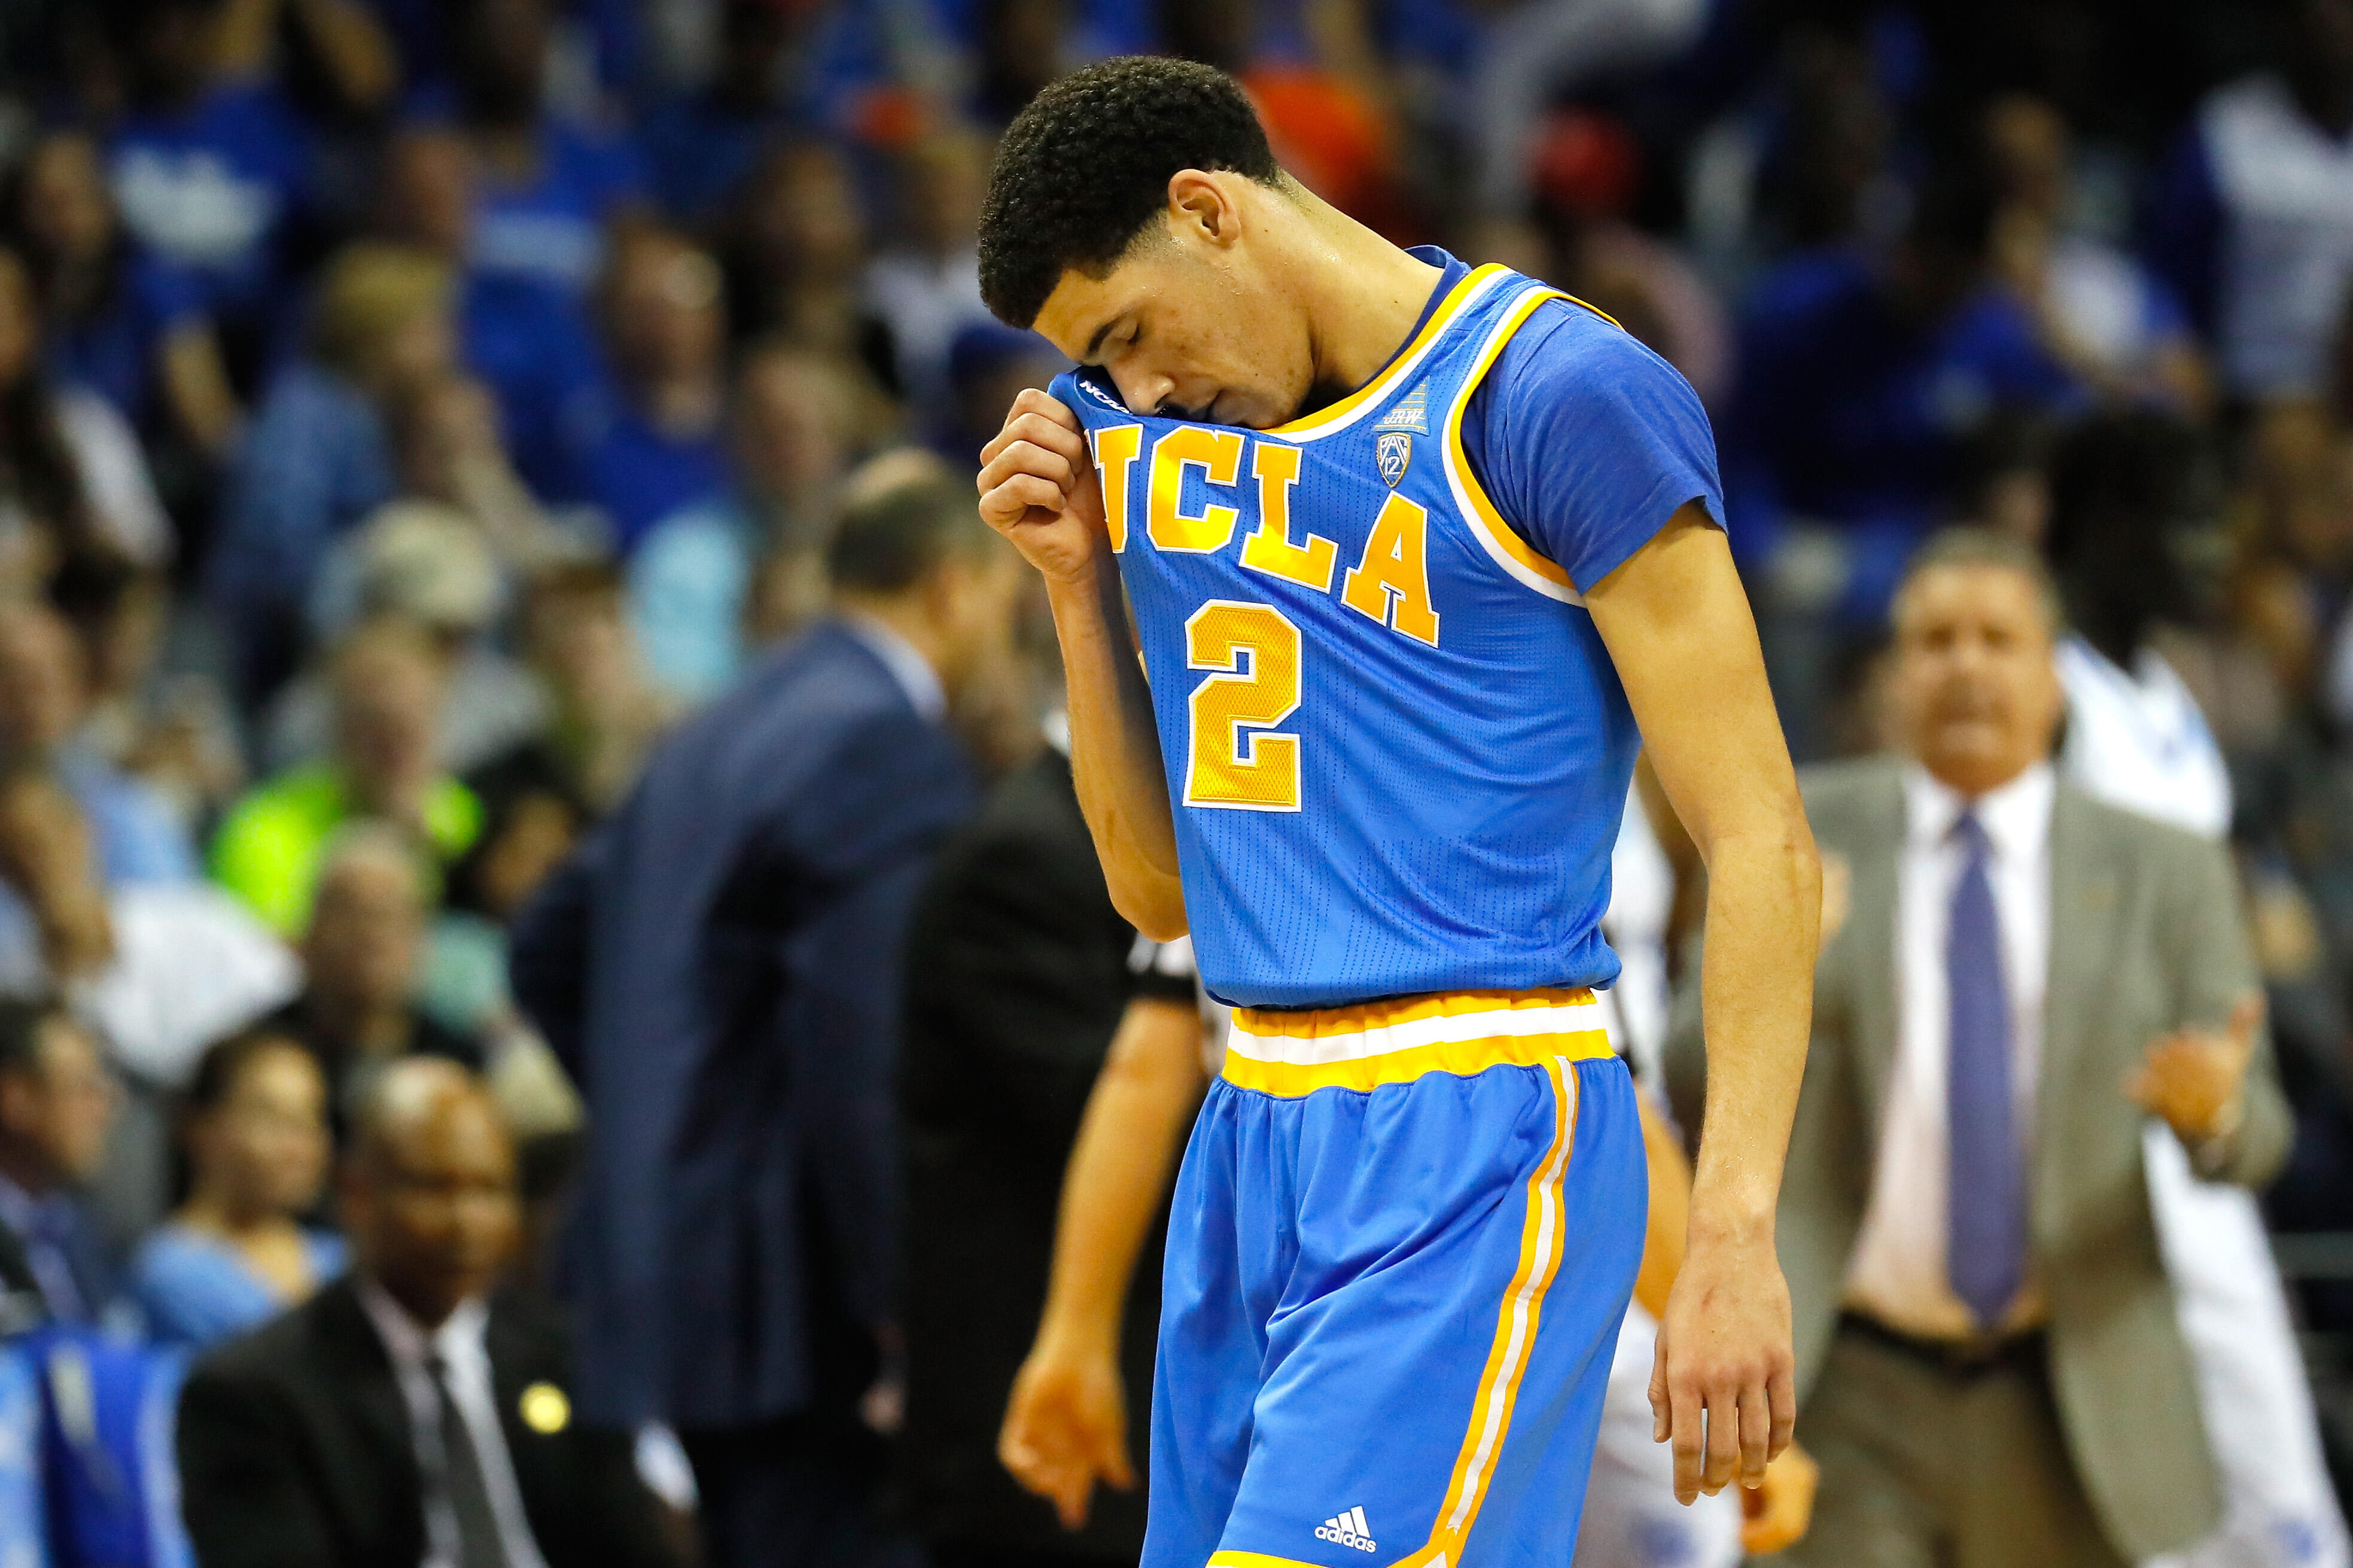 MEMPHIS, TN - MARCH 24: Lonzo Ball #2 of the UCLA Bruins reacts in the first half against the Kentucky Wildcats during the 2017 NCAA Men's Basketball Tournament South Regional at FedExForum on March 24, 2017 in Memphis, Tennessee.  (Photo by Kevin C. Cox/